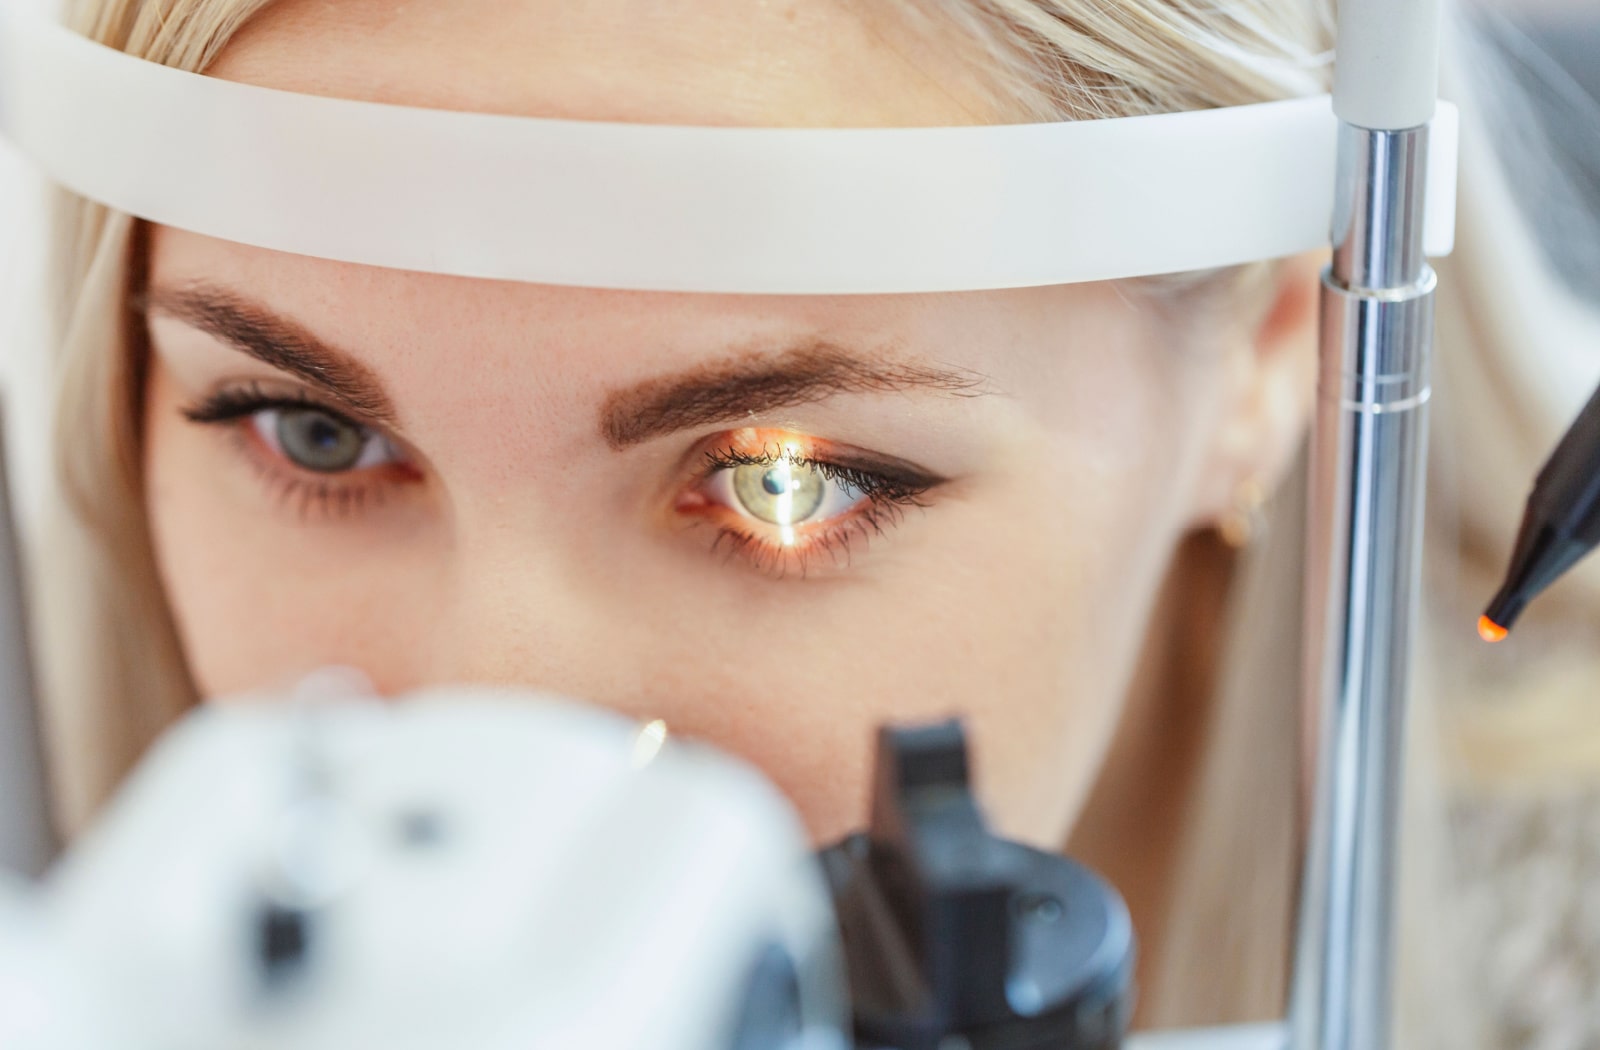 An optometrist uses a slit lamp to examine a female patient's eyes